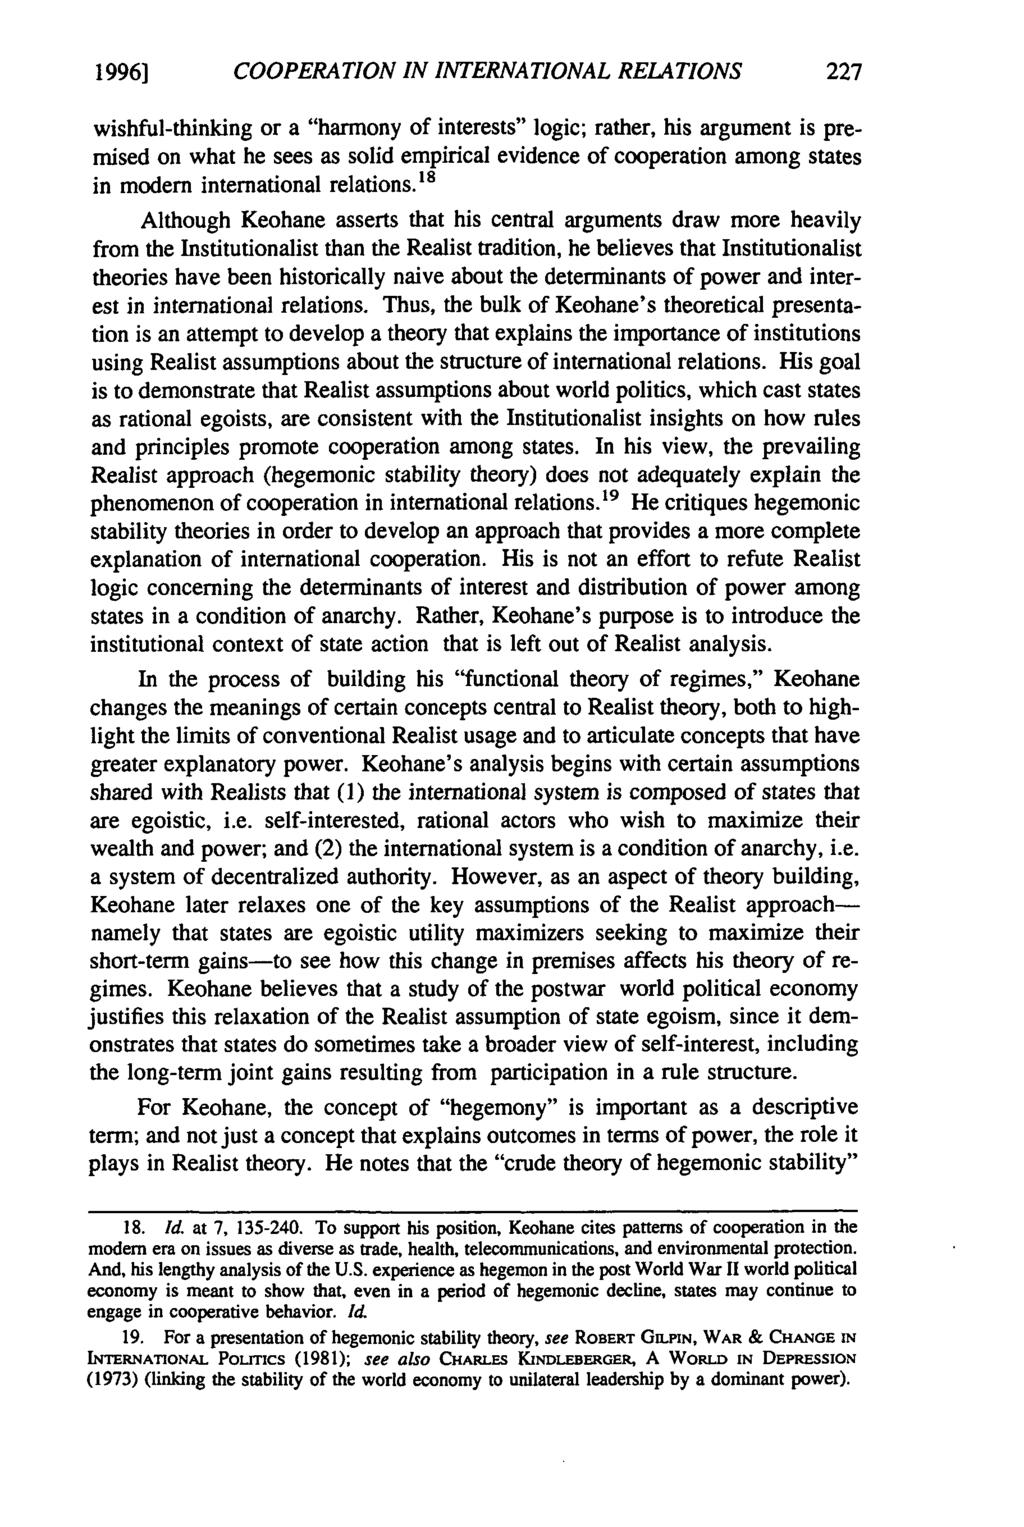 1996] COOPERATION IN INTERNATIONAL RELATIONS wishful-thinking or a "harmony of interests" logic; rather, his argument is premised on what he sees as solid empirical evidence of cooperation among